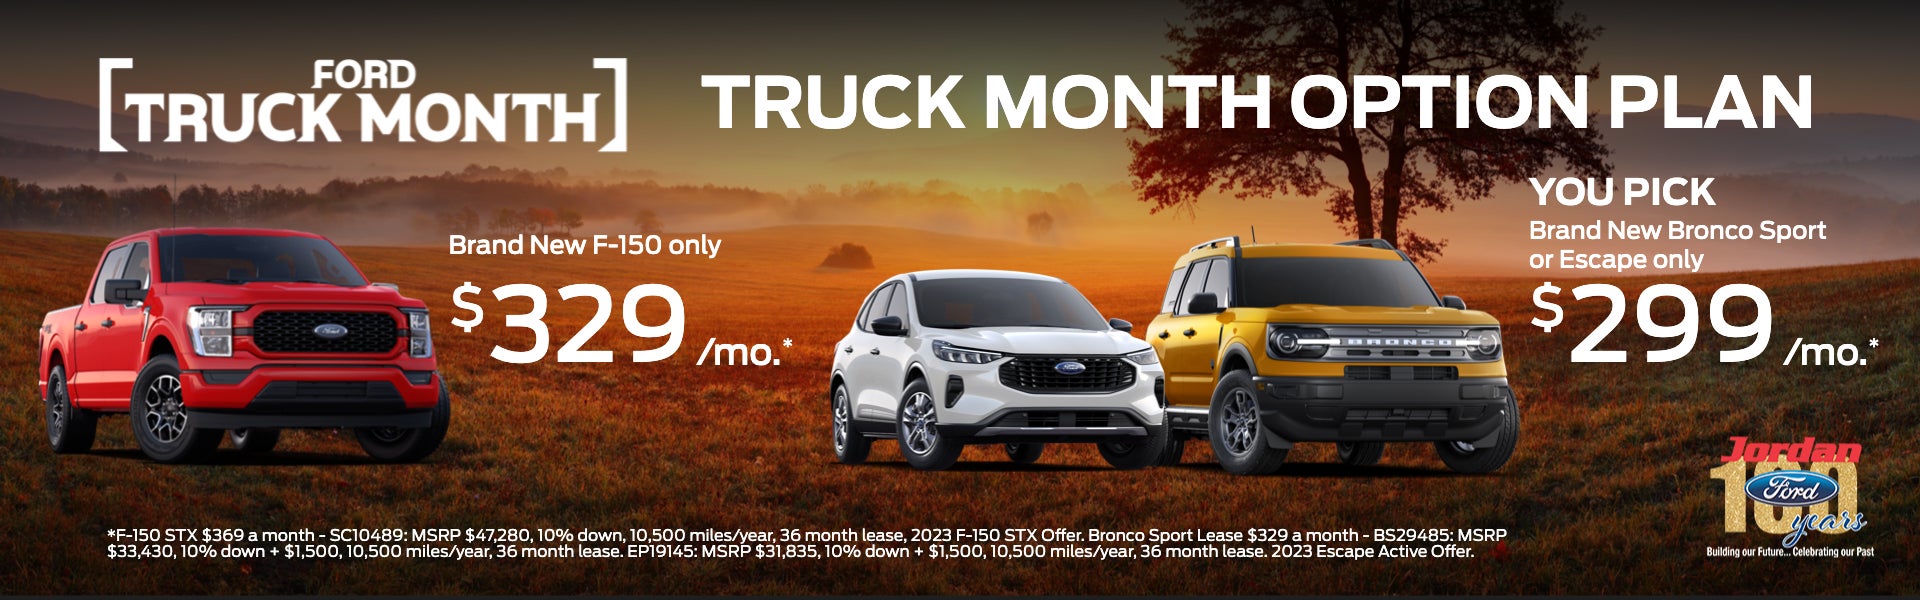 Truck Month F-150 for $369 or Bronco Sport for $329